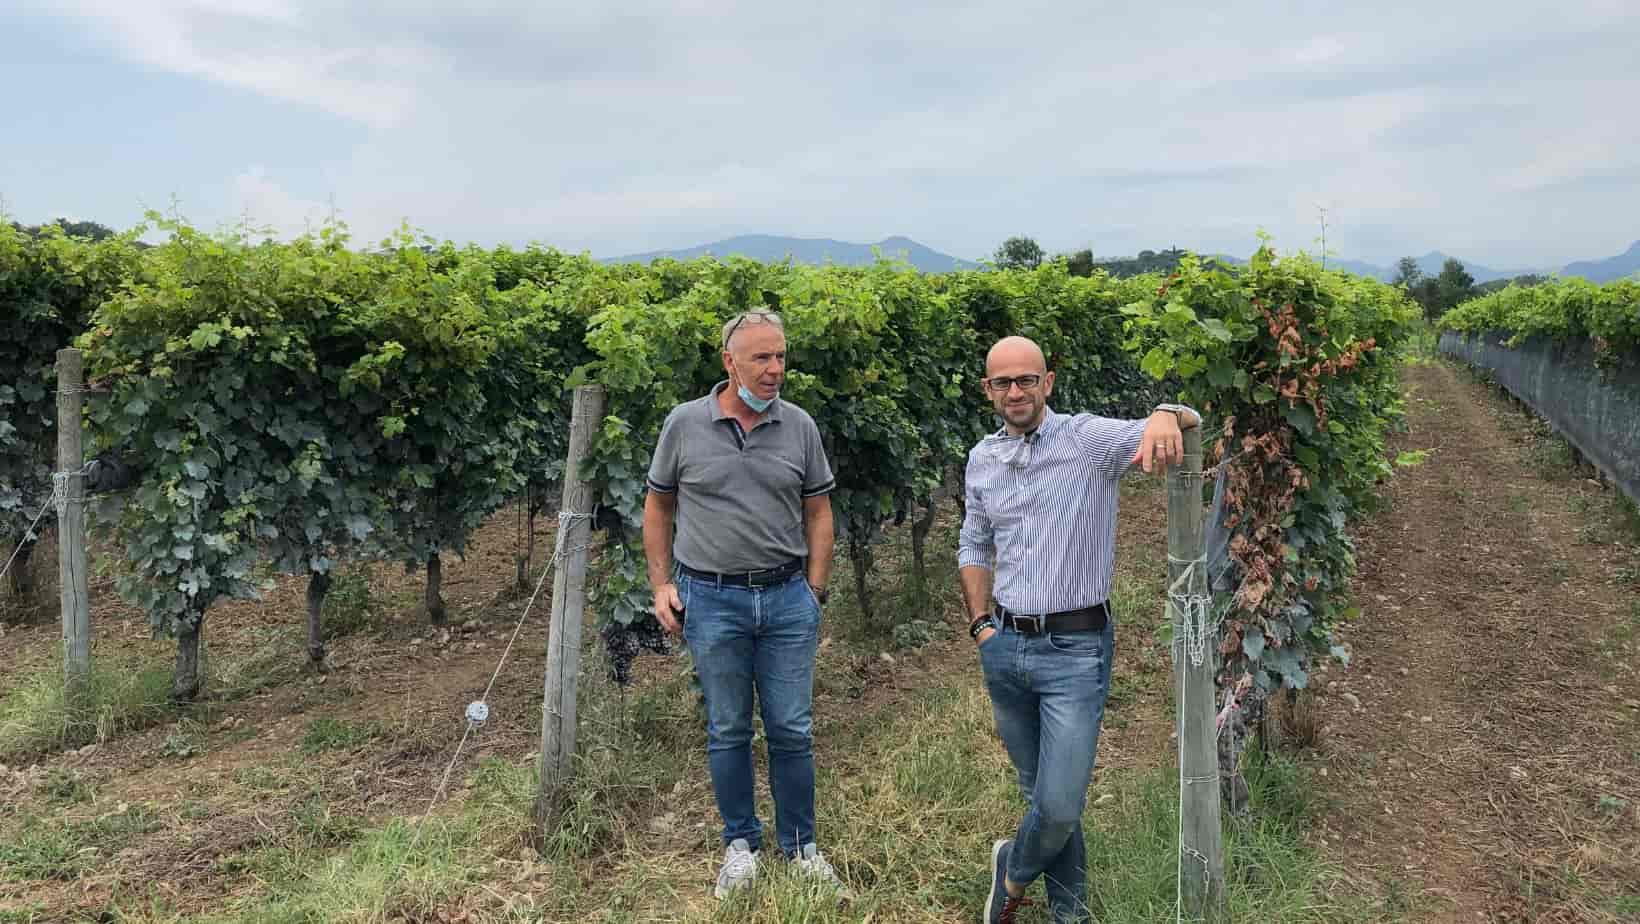 Our US importer visited Sincette winery in August 2020.